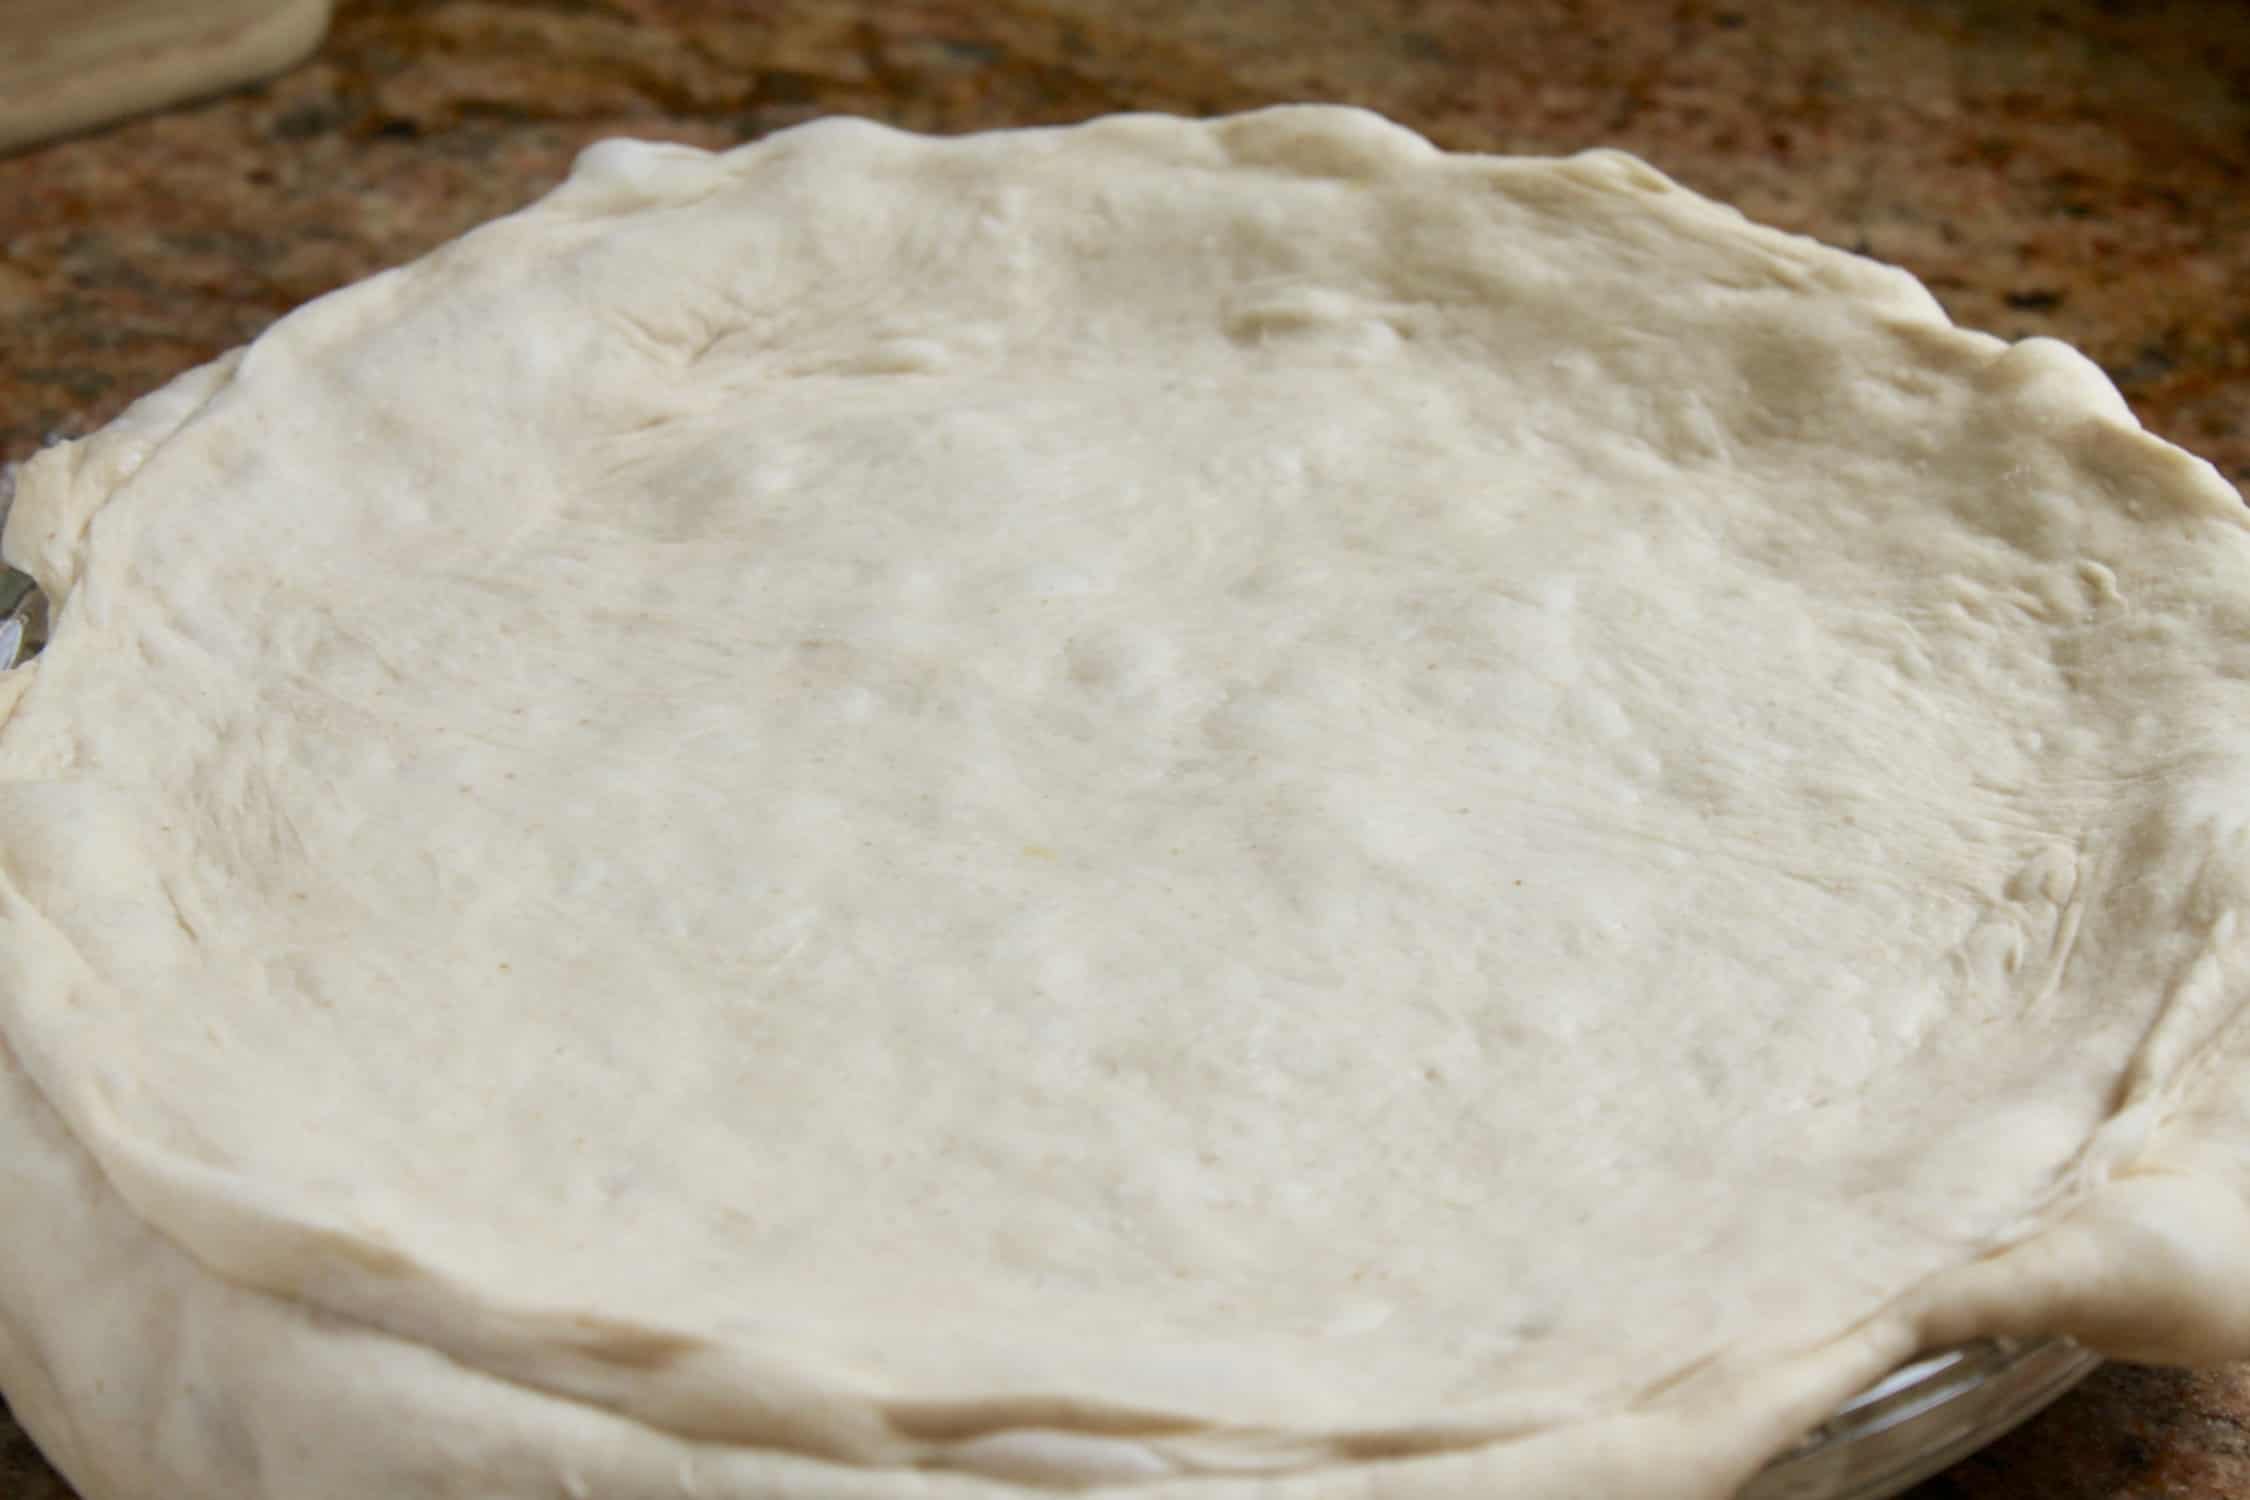 Filled pizza rustica ready to bake